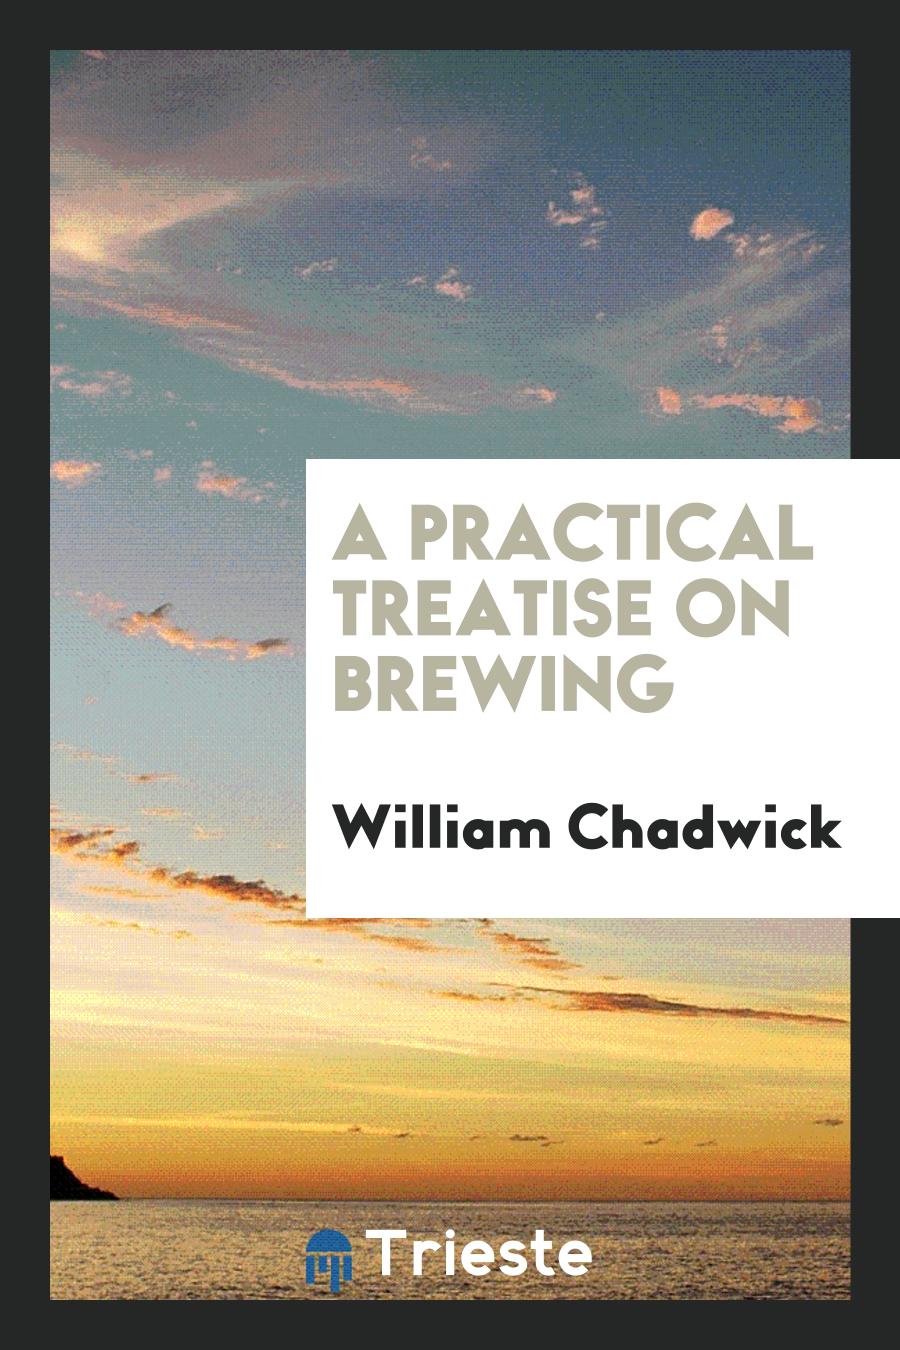 A practical treatise on brewing